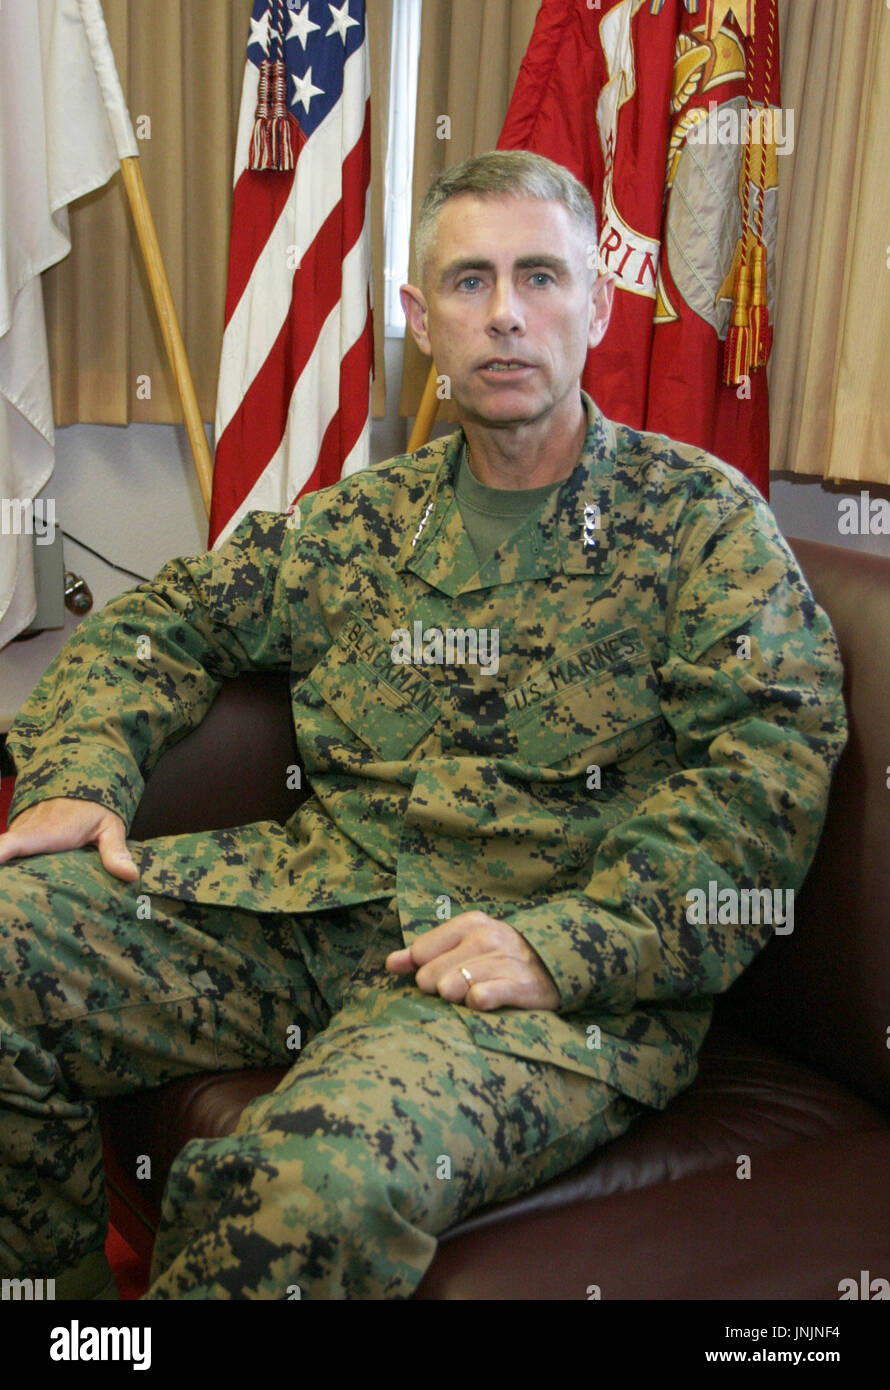 NAHA, Japan - U.S. Marine Corps Lt. Gen. Robert Blackman, in charge of U.S. forces in Okinawa Prefecture, speaks with Kyodo News during an interview in Camp Courtney in the prefecture on Dec. 20. (Kyodo) Stock Photo